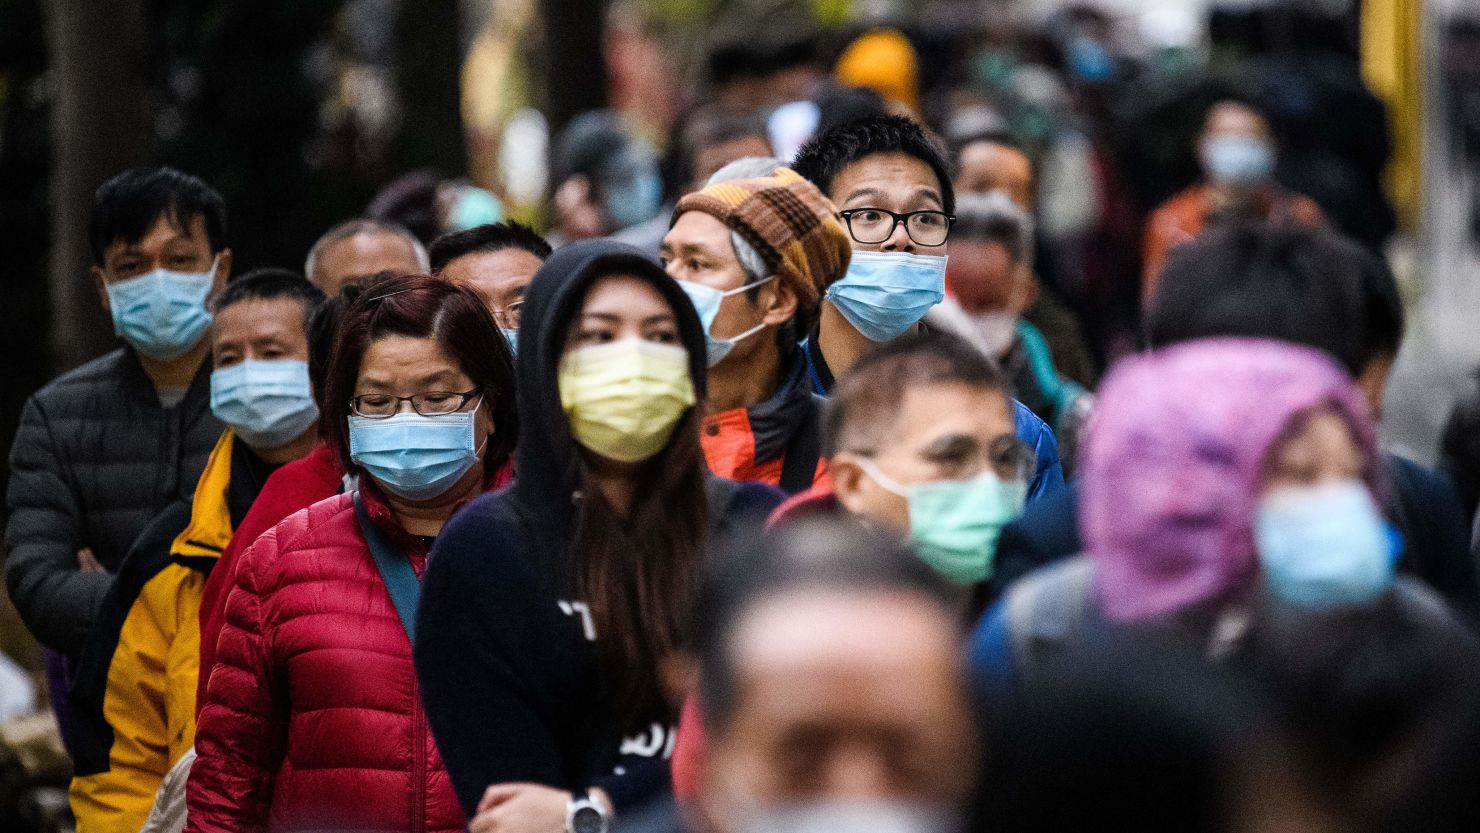 People wearing face masks following a coronavirus outbreak which began in the Chinese city of Wuhan.